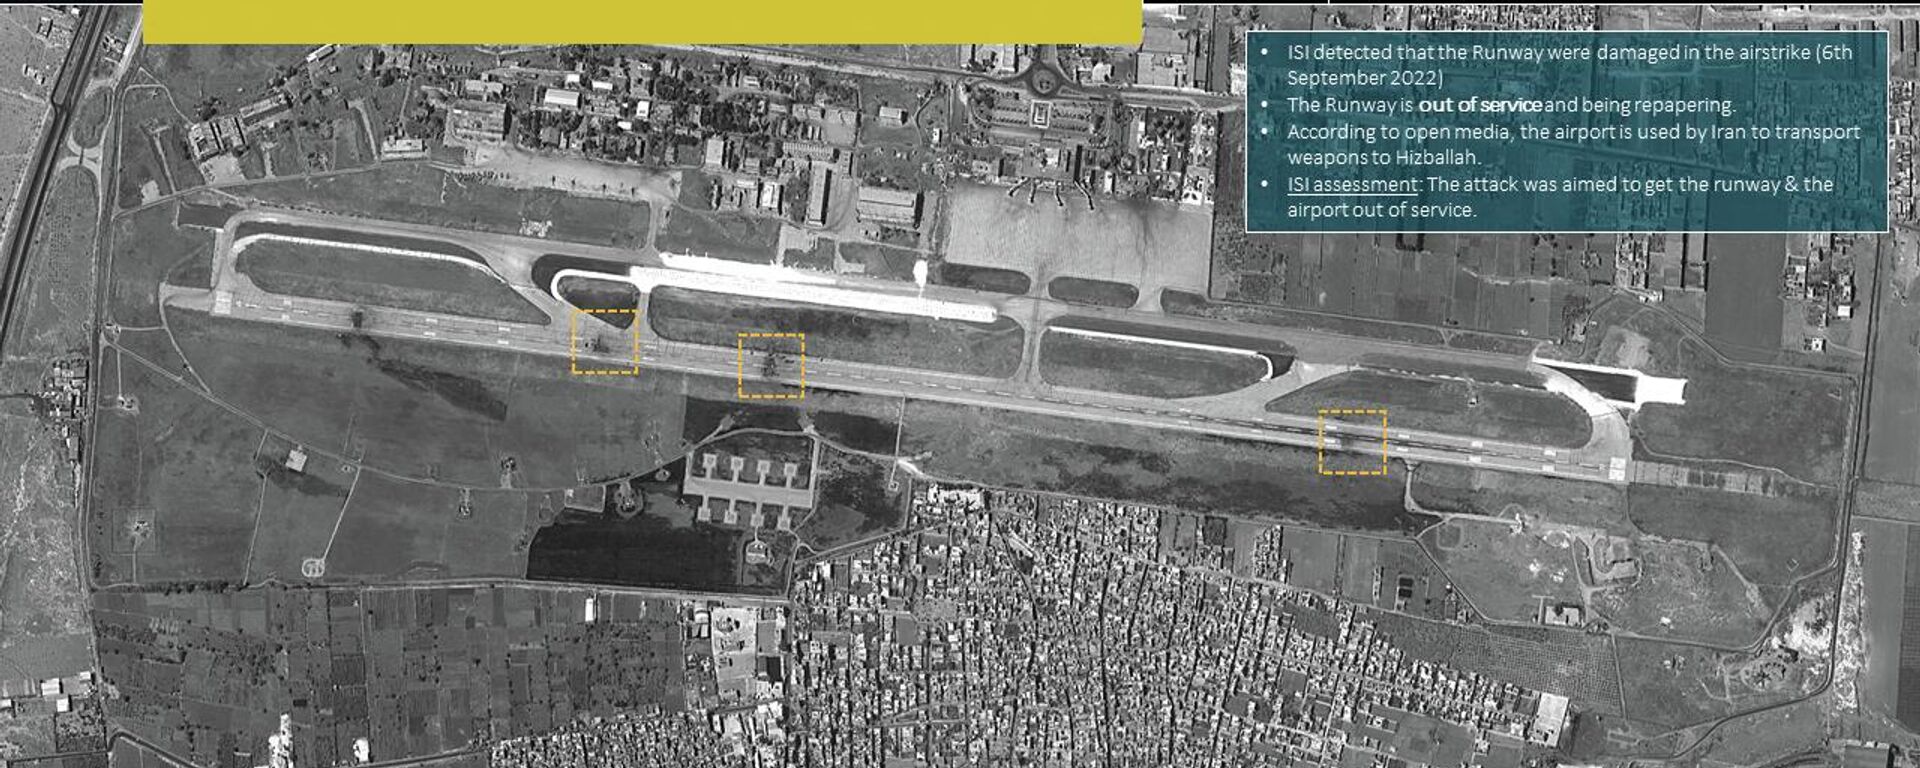 A handout picture released by ImageSat International (ISI) on September 7, 2022, shows a satellite image depicting the damage at Aleppo airport in northern Syria following reported Israeli strikes on September 6, 2022.  - Sputnik International, 1920, 07.09.2022